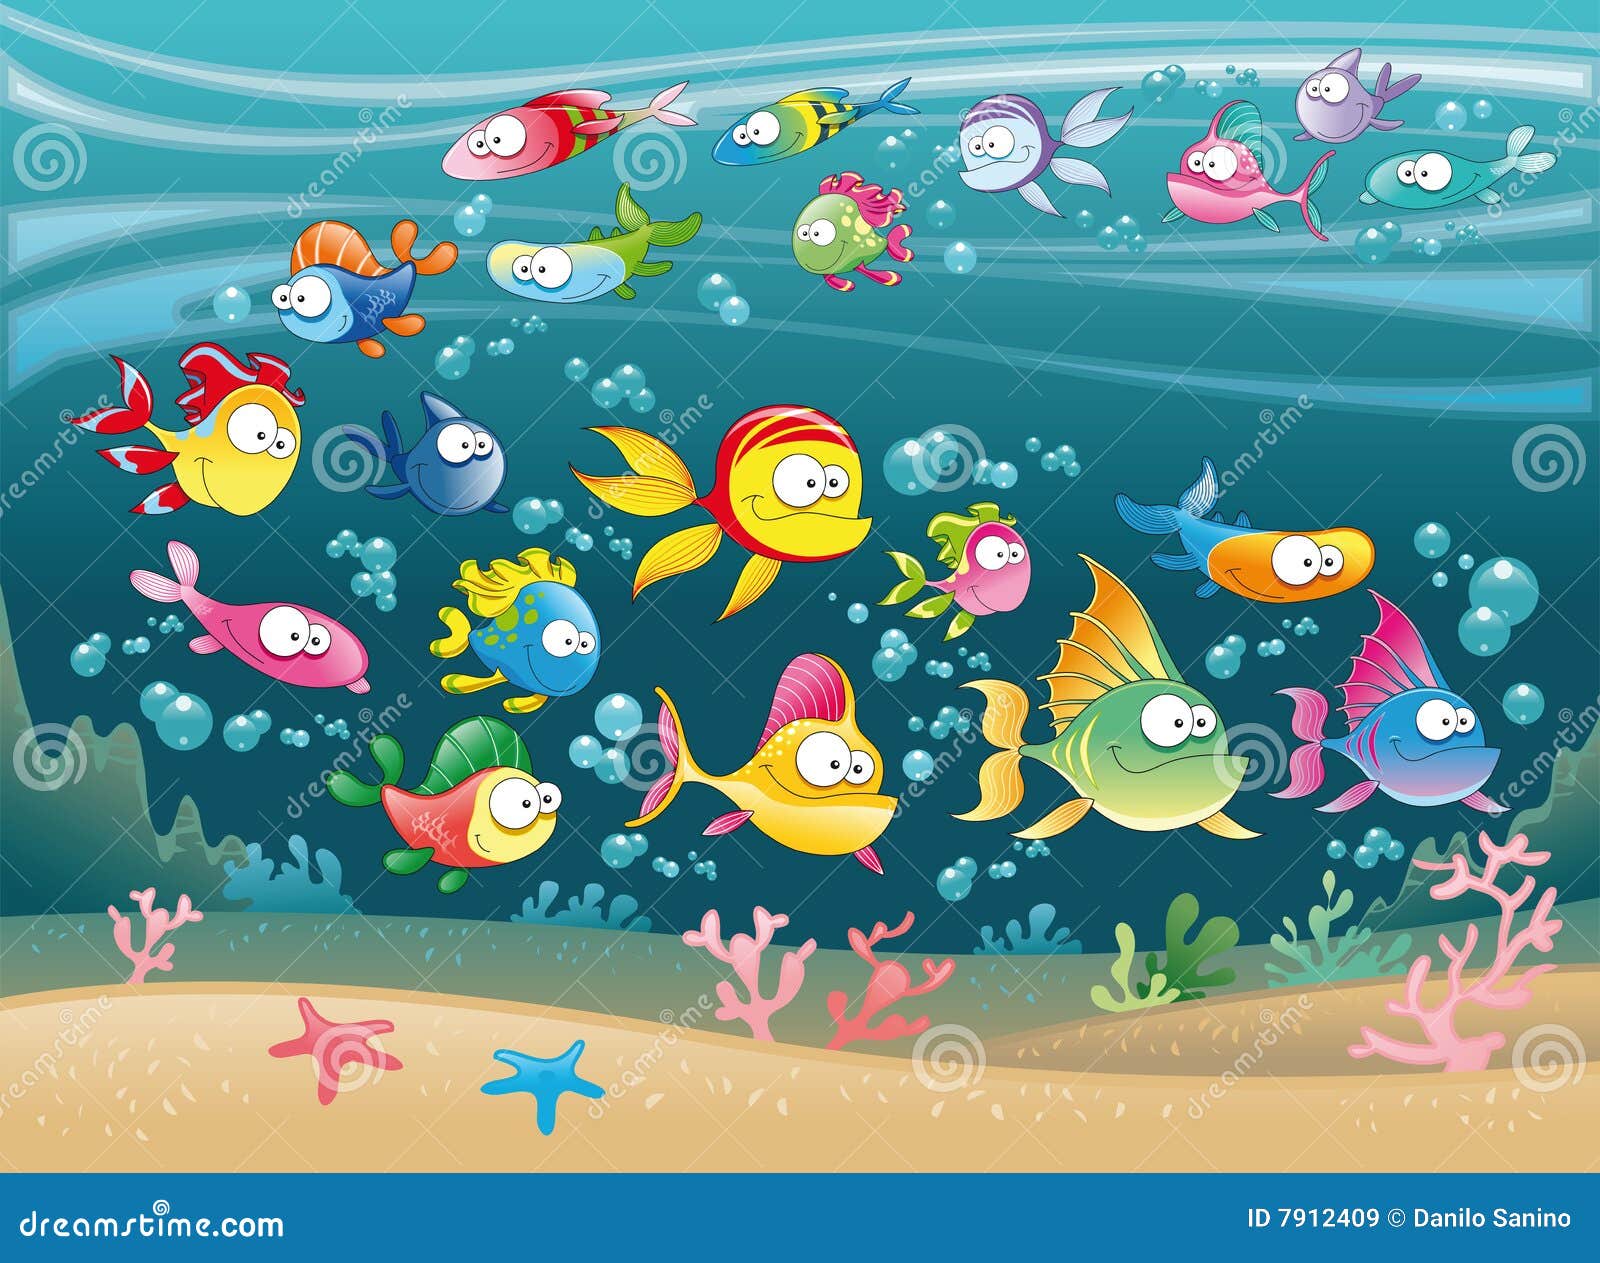 big family of fish in the sea